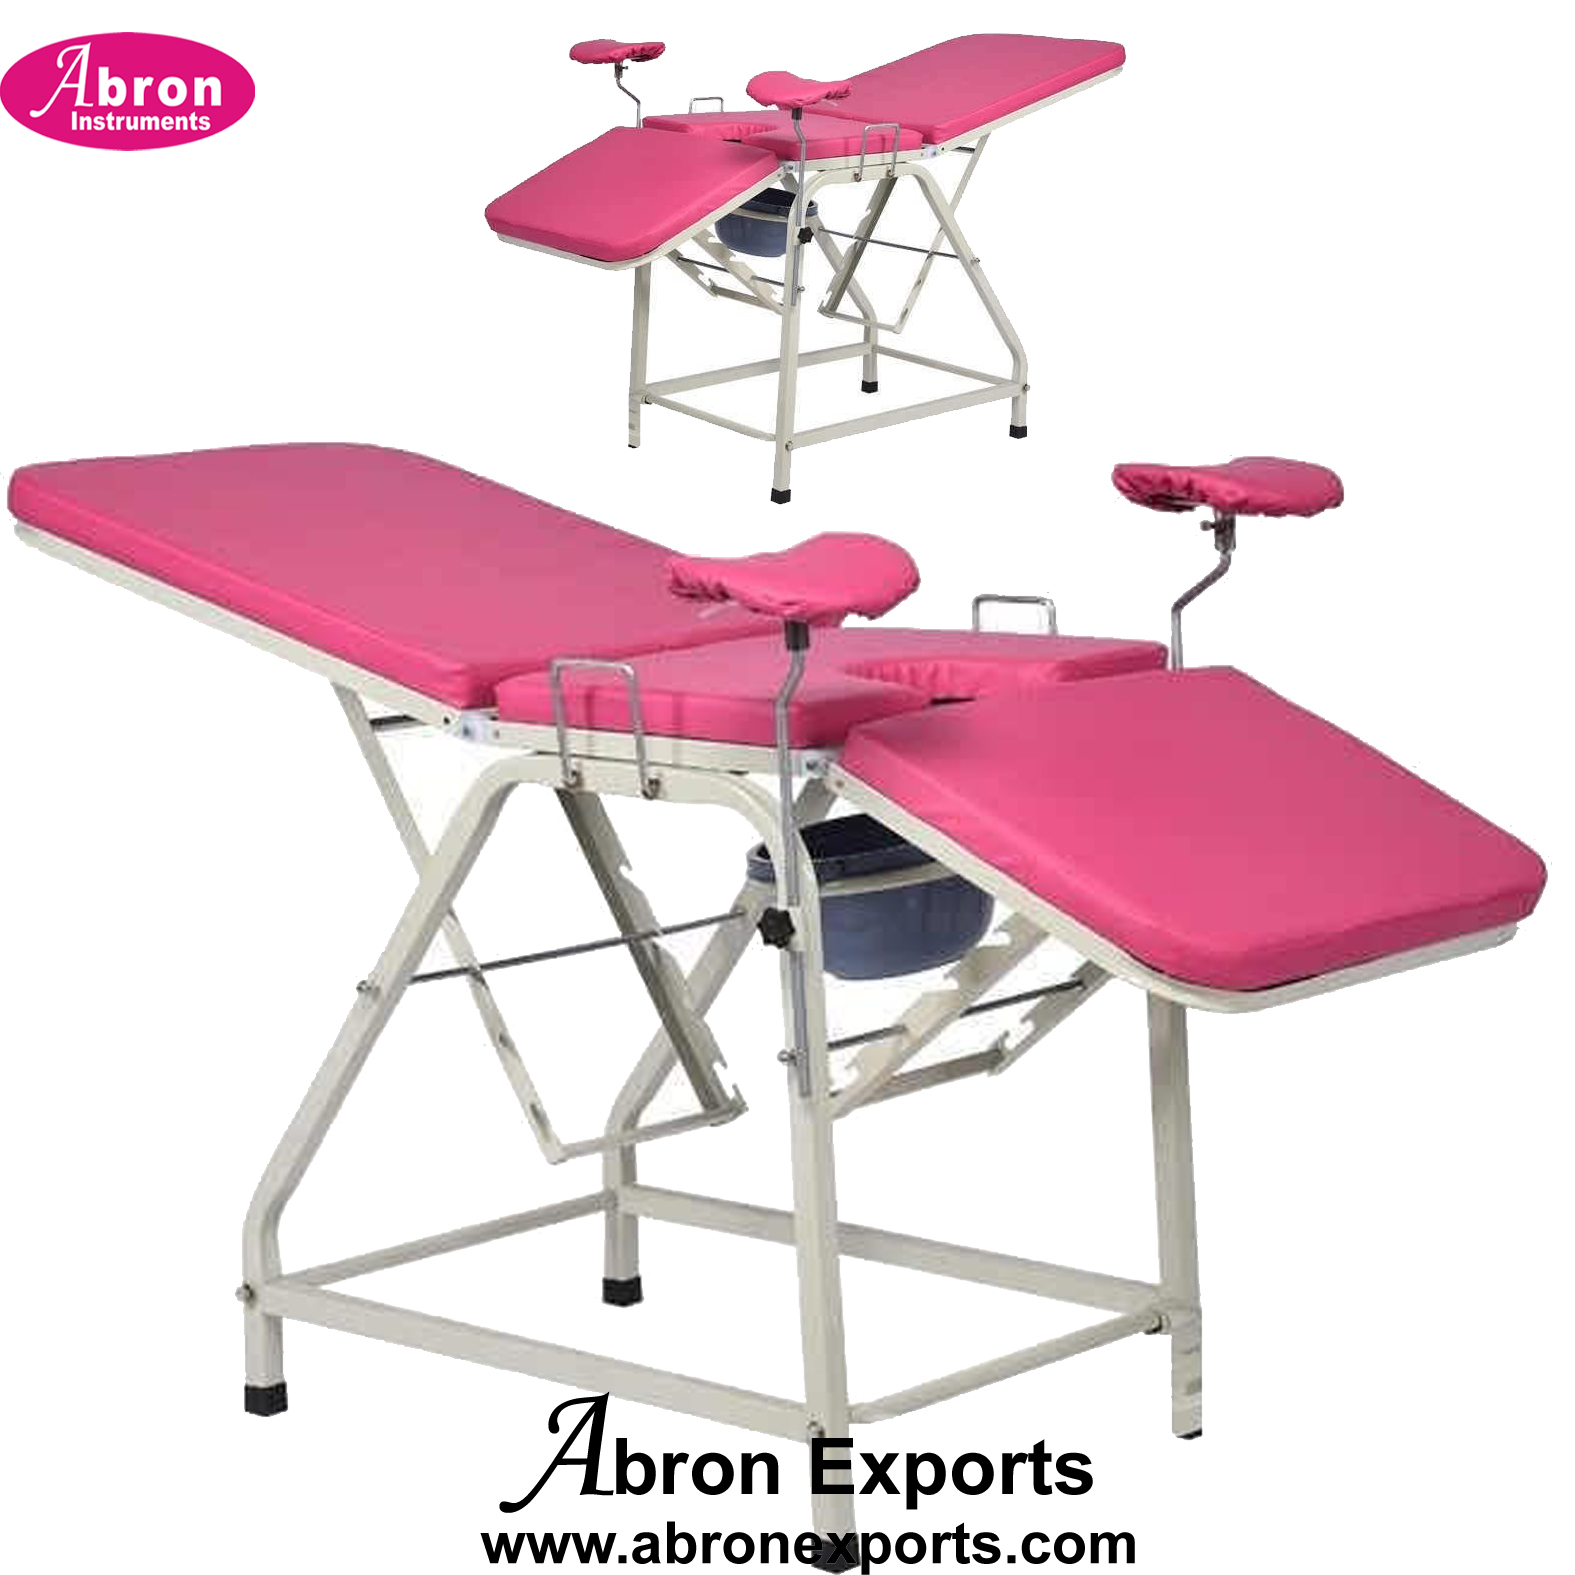 Gynecological Obstetric Delivery Examination Table Bed Chair Labour 3 Sections Legs Support Matters Abron ABM-2714GYR 